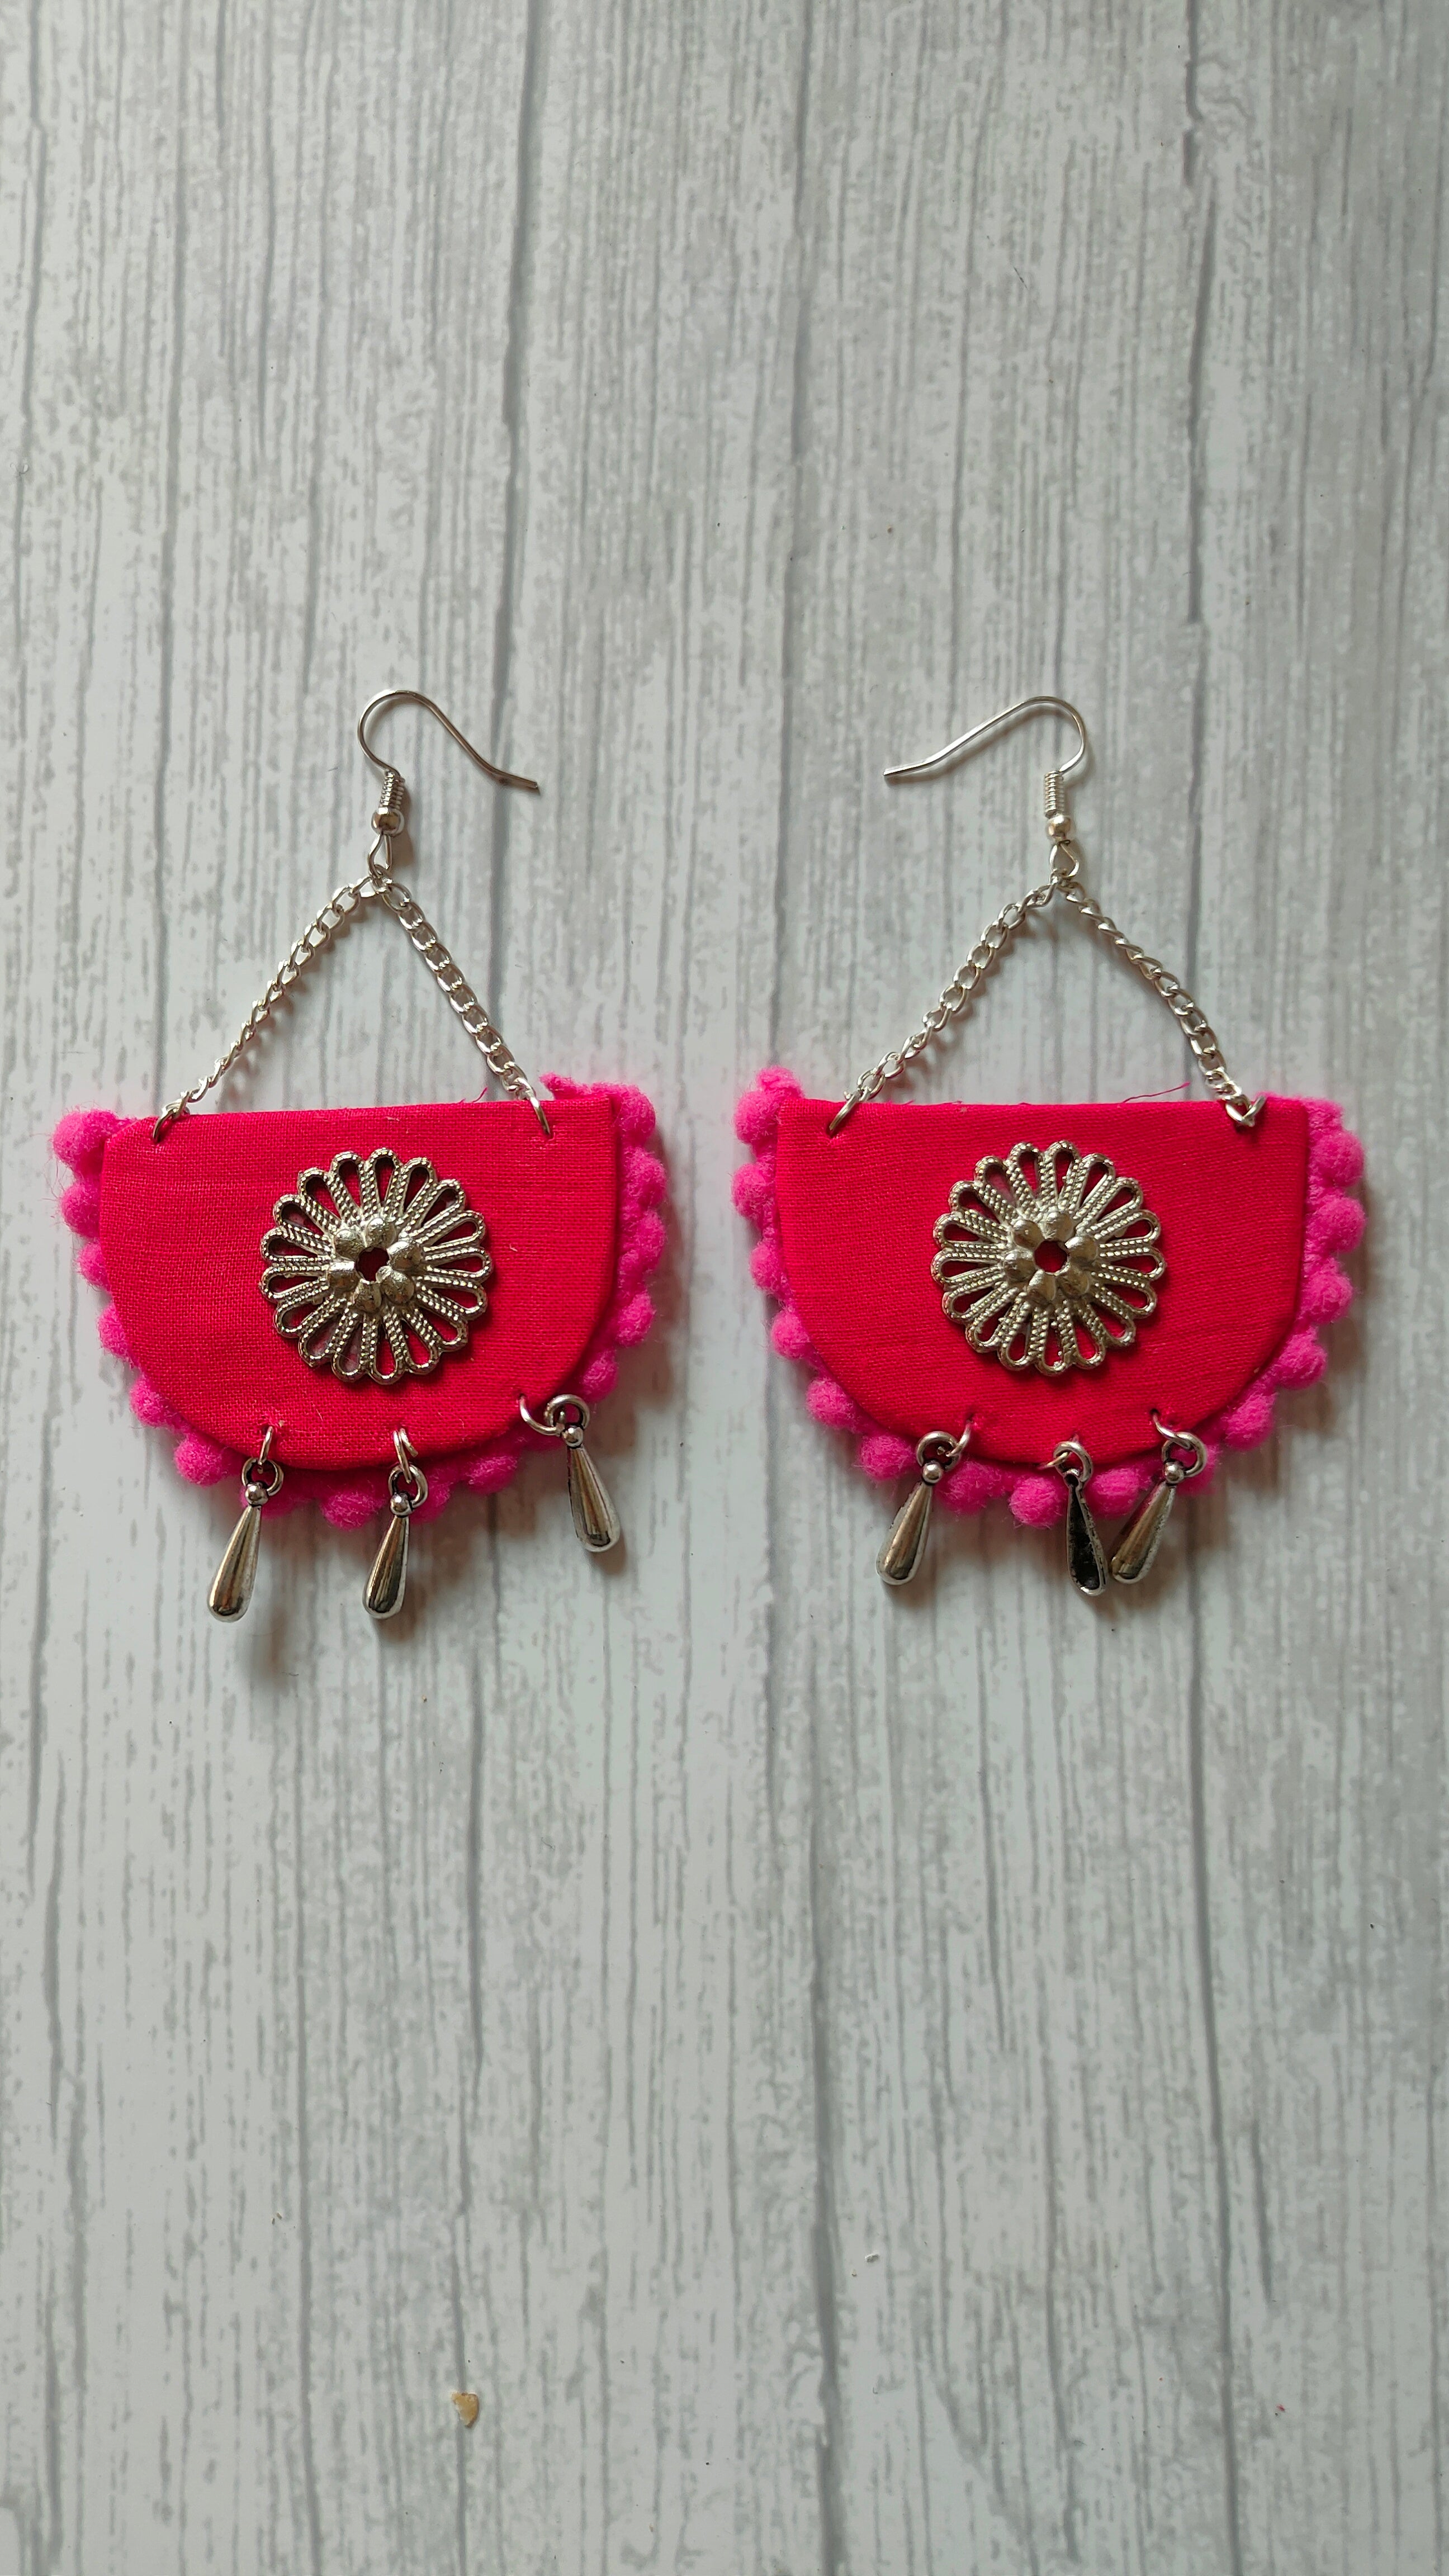 Handcrafted Semi-Circle Fabric Earrings with Chain Strings